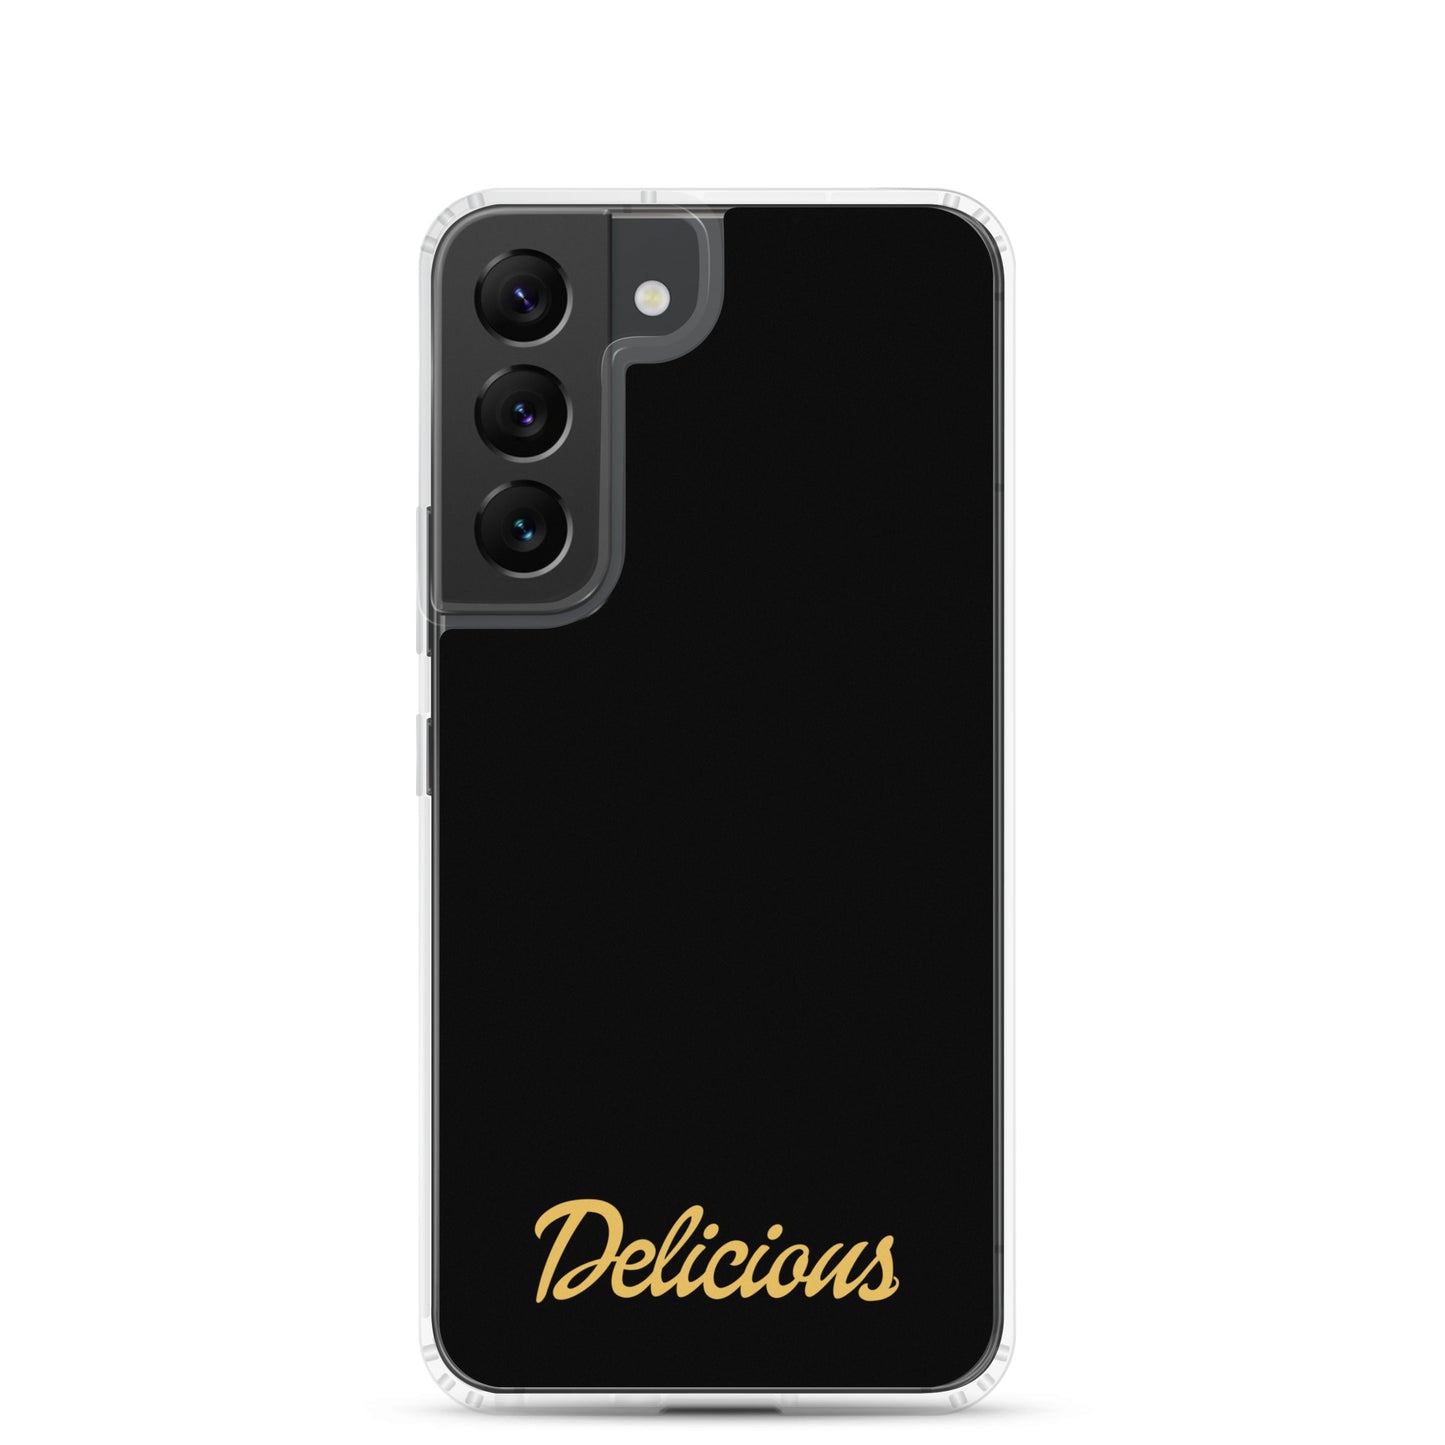 Delicious cover til Samsung®